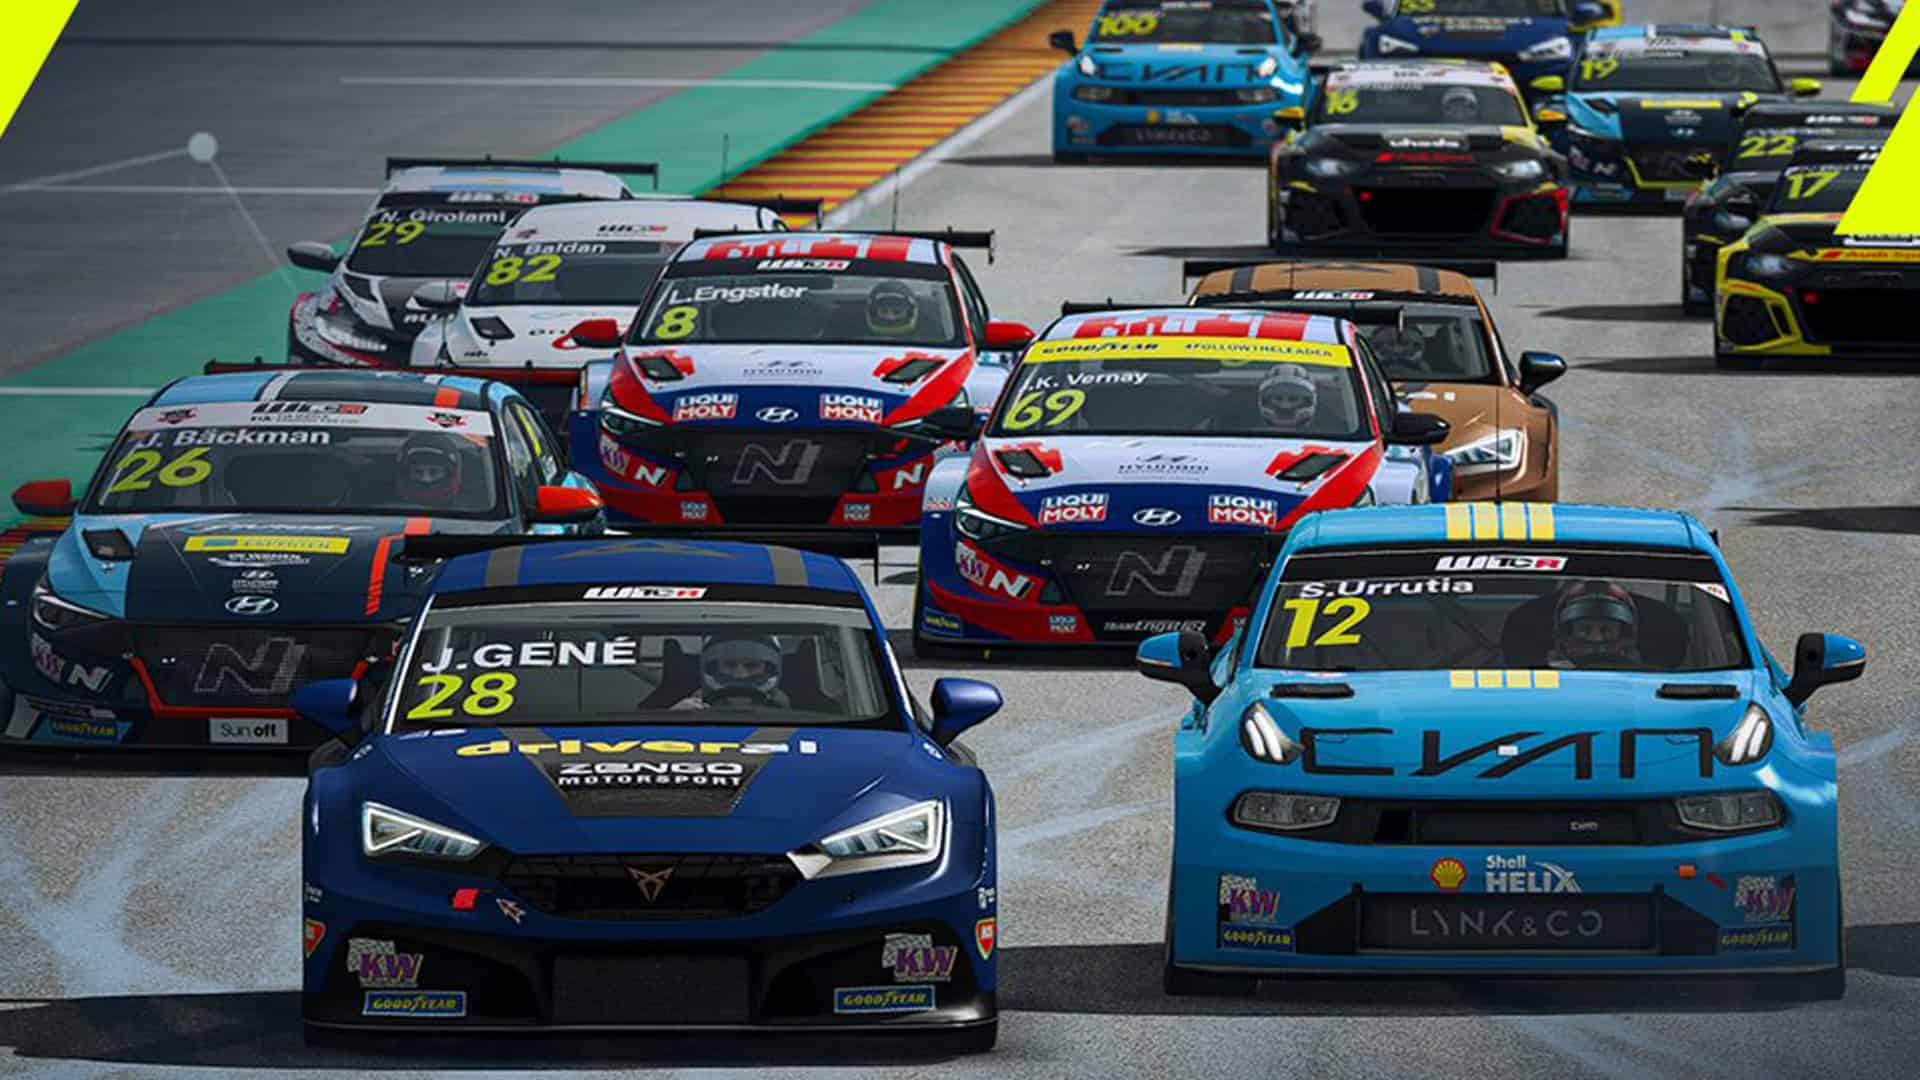 The 2021 WTCR season, and Hyundai Elantra N TCR, are coming to RaceRoom